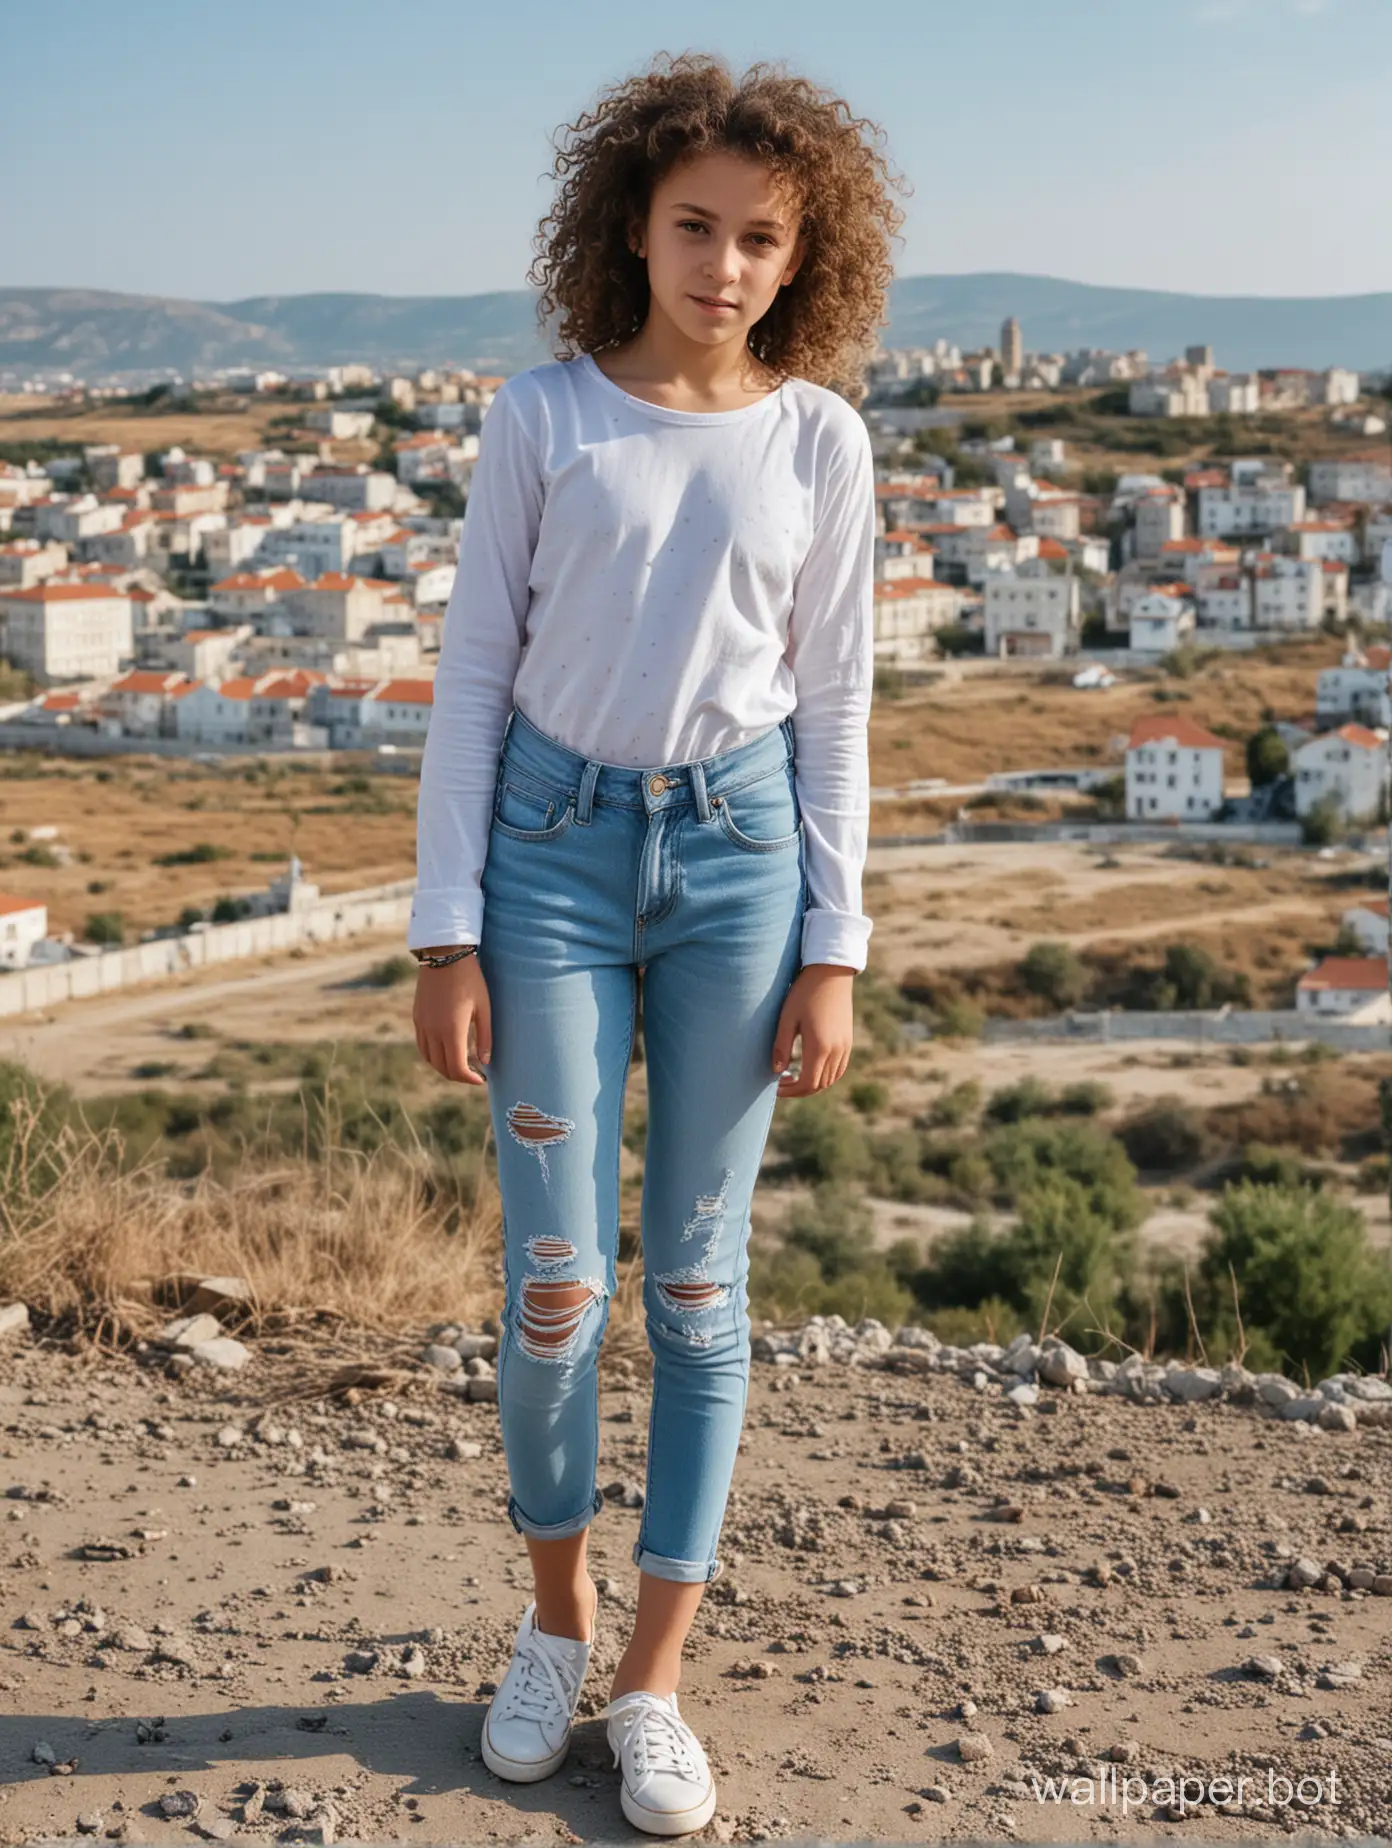 An 11-year-old girl with curly hair in light jeans with holes, Crimea, view of a small town, full length